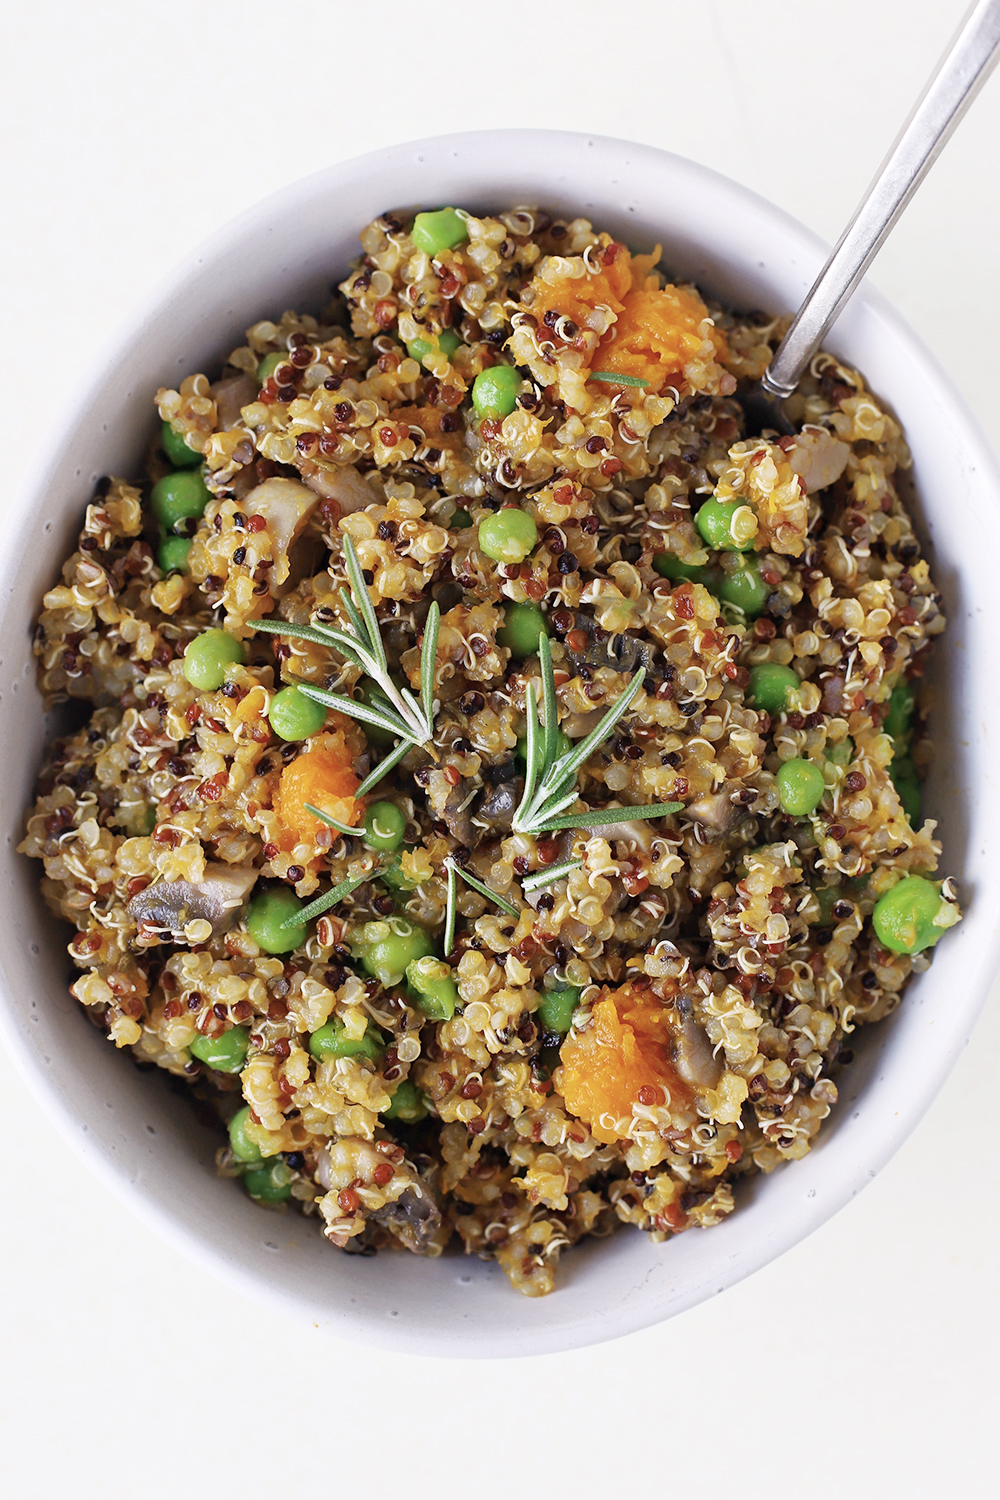 Hearty vegan comfort food healthy dinner idea: Creamy mushroom and pumpkin quinoa rissoto with peas and without wine